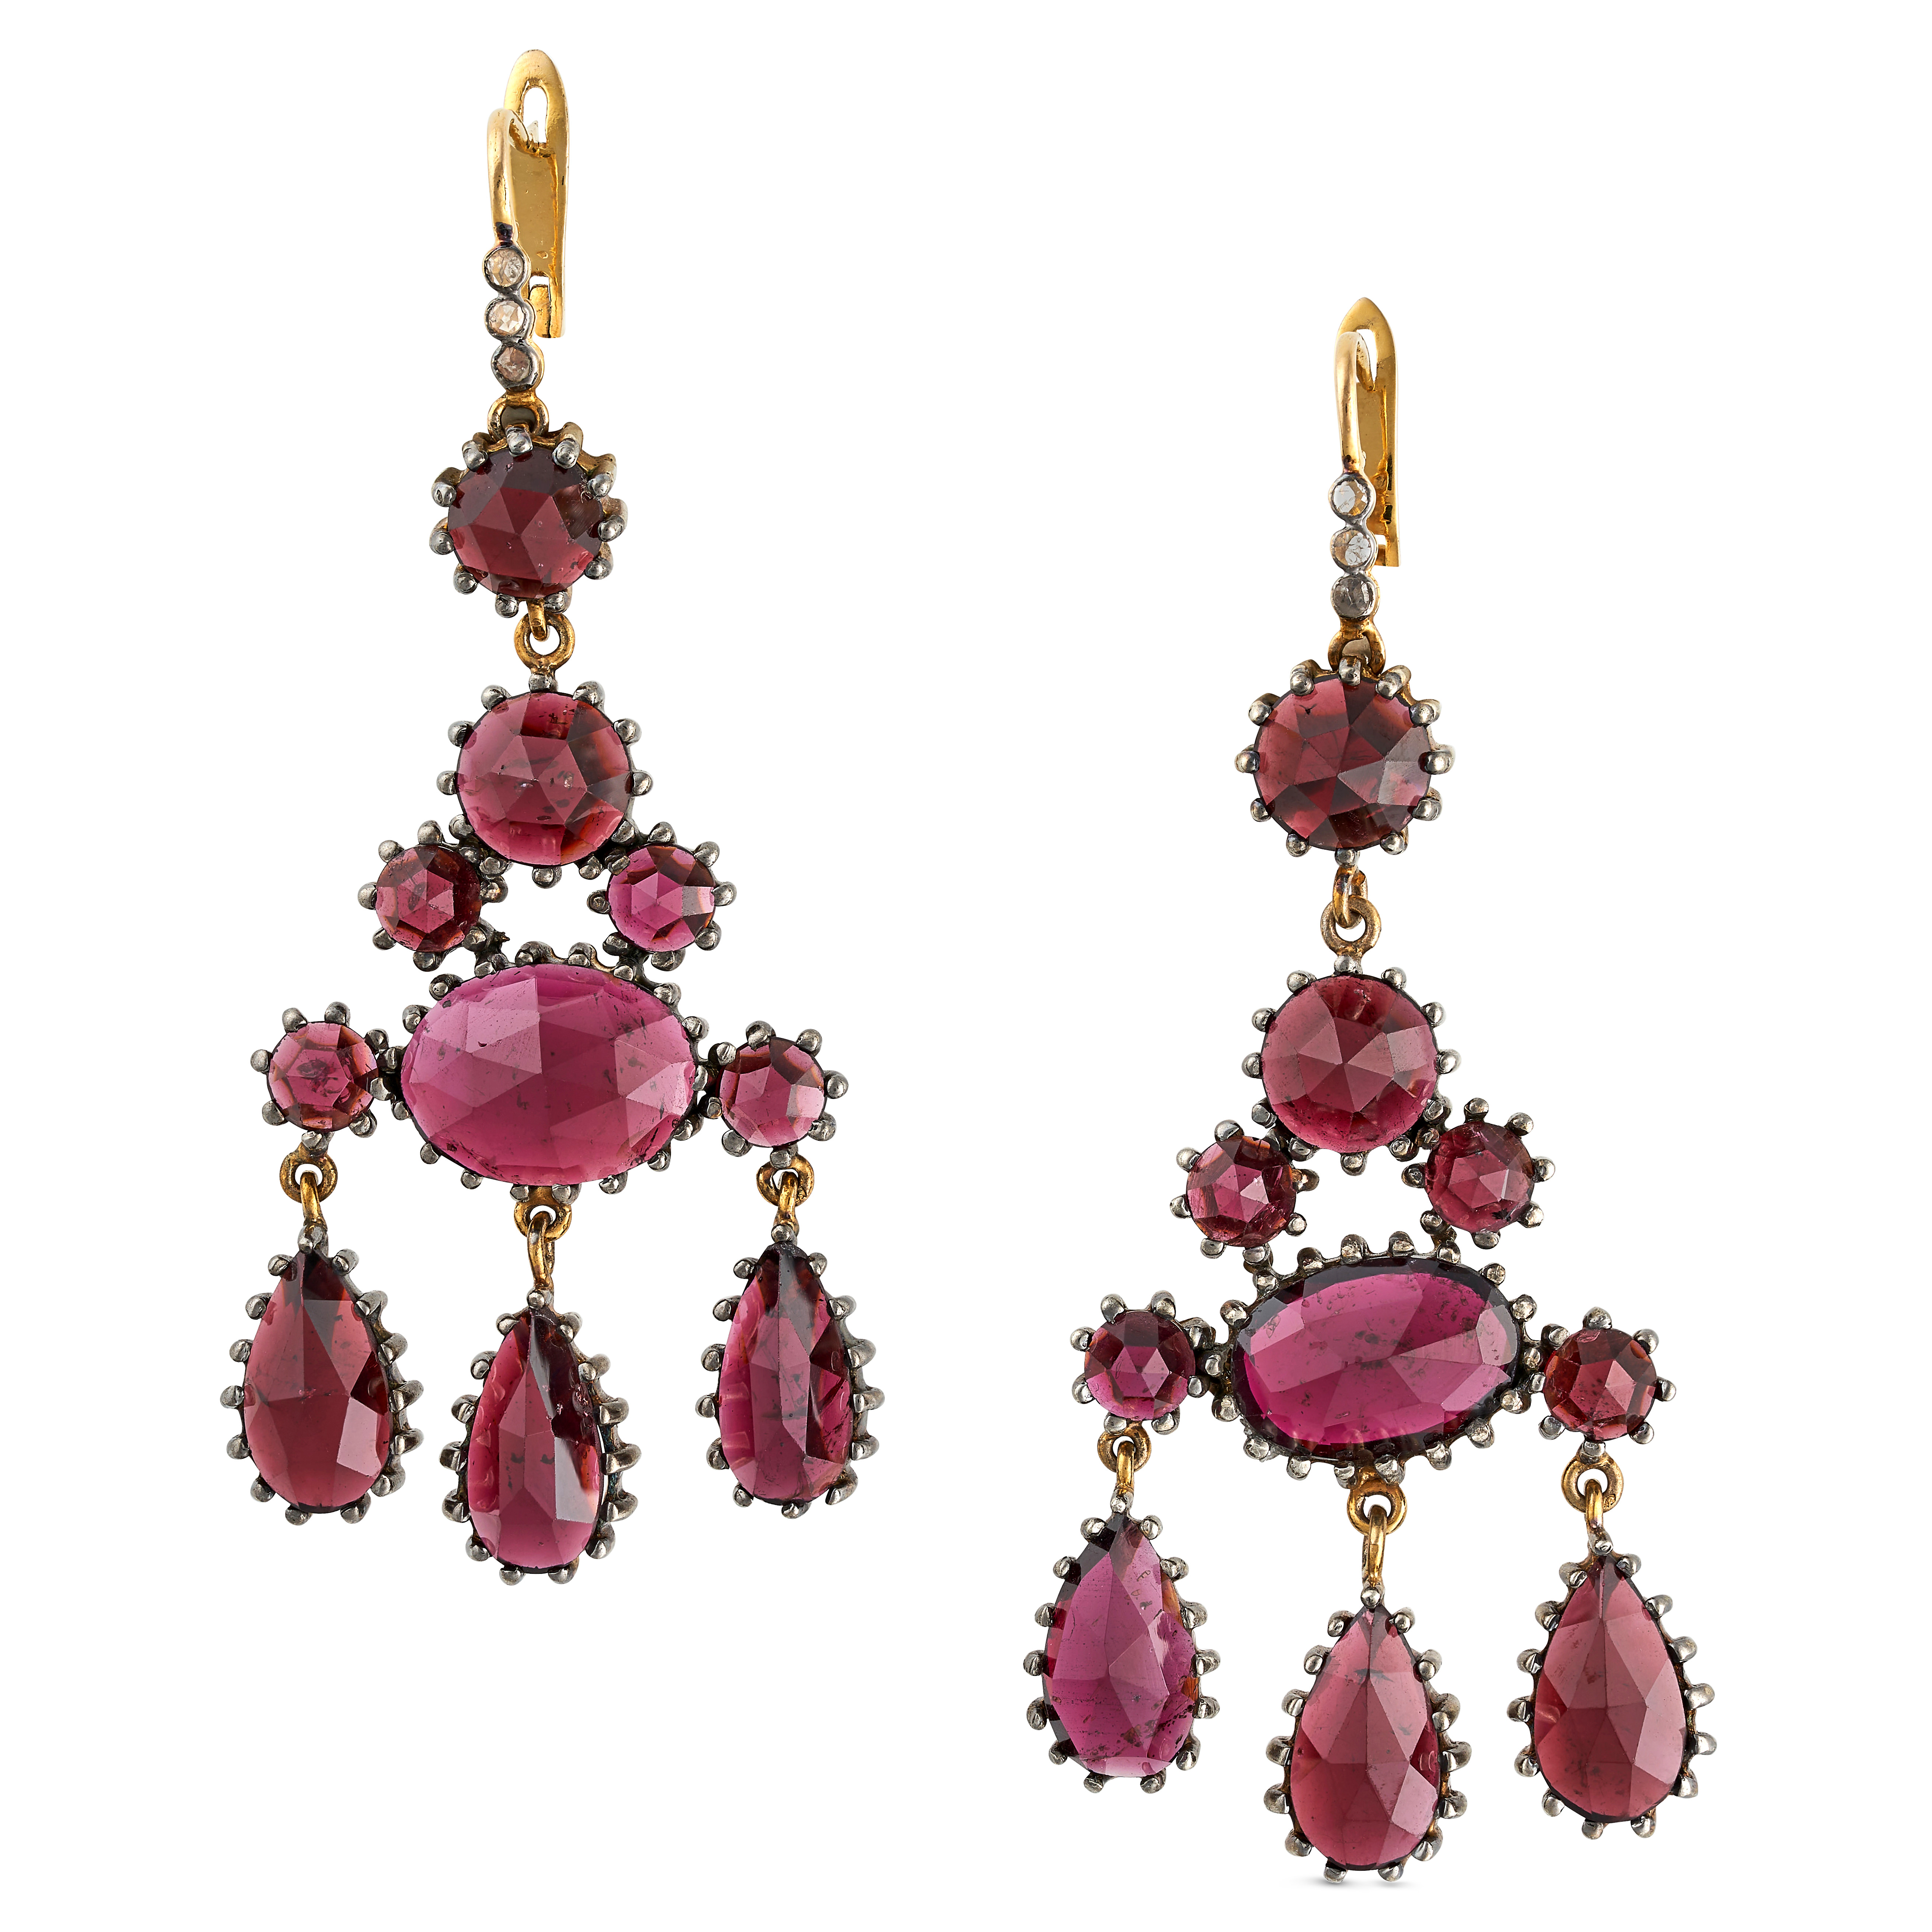 A PAIR OF GARNET GIRANDOLE EARRINGS in yellow gold and silver, each comprising a row of three ros...